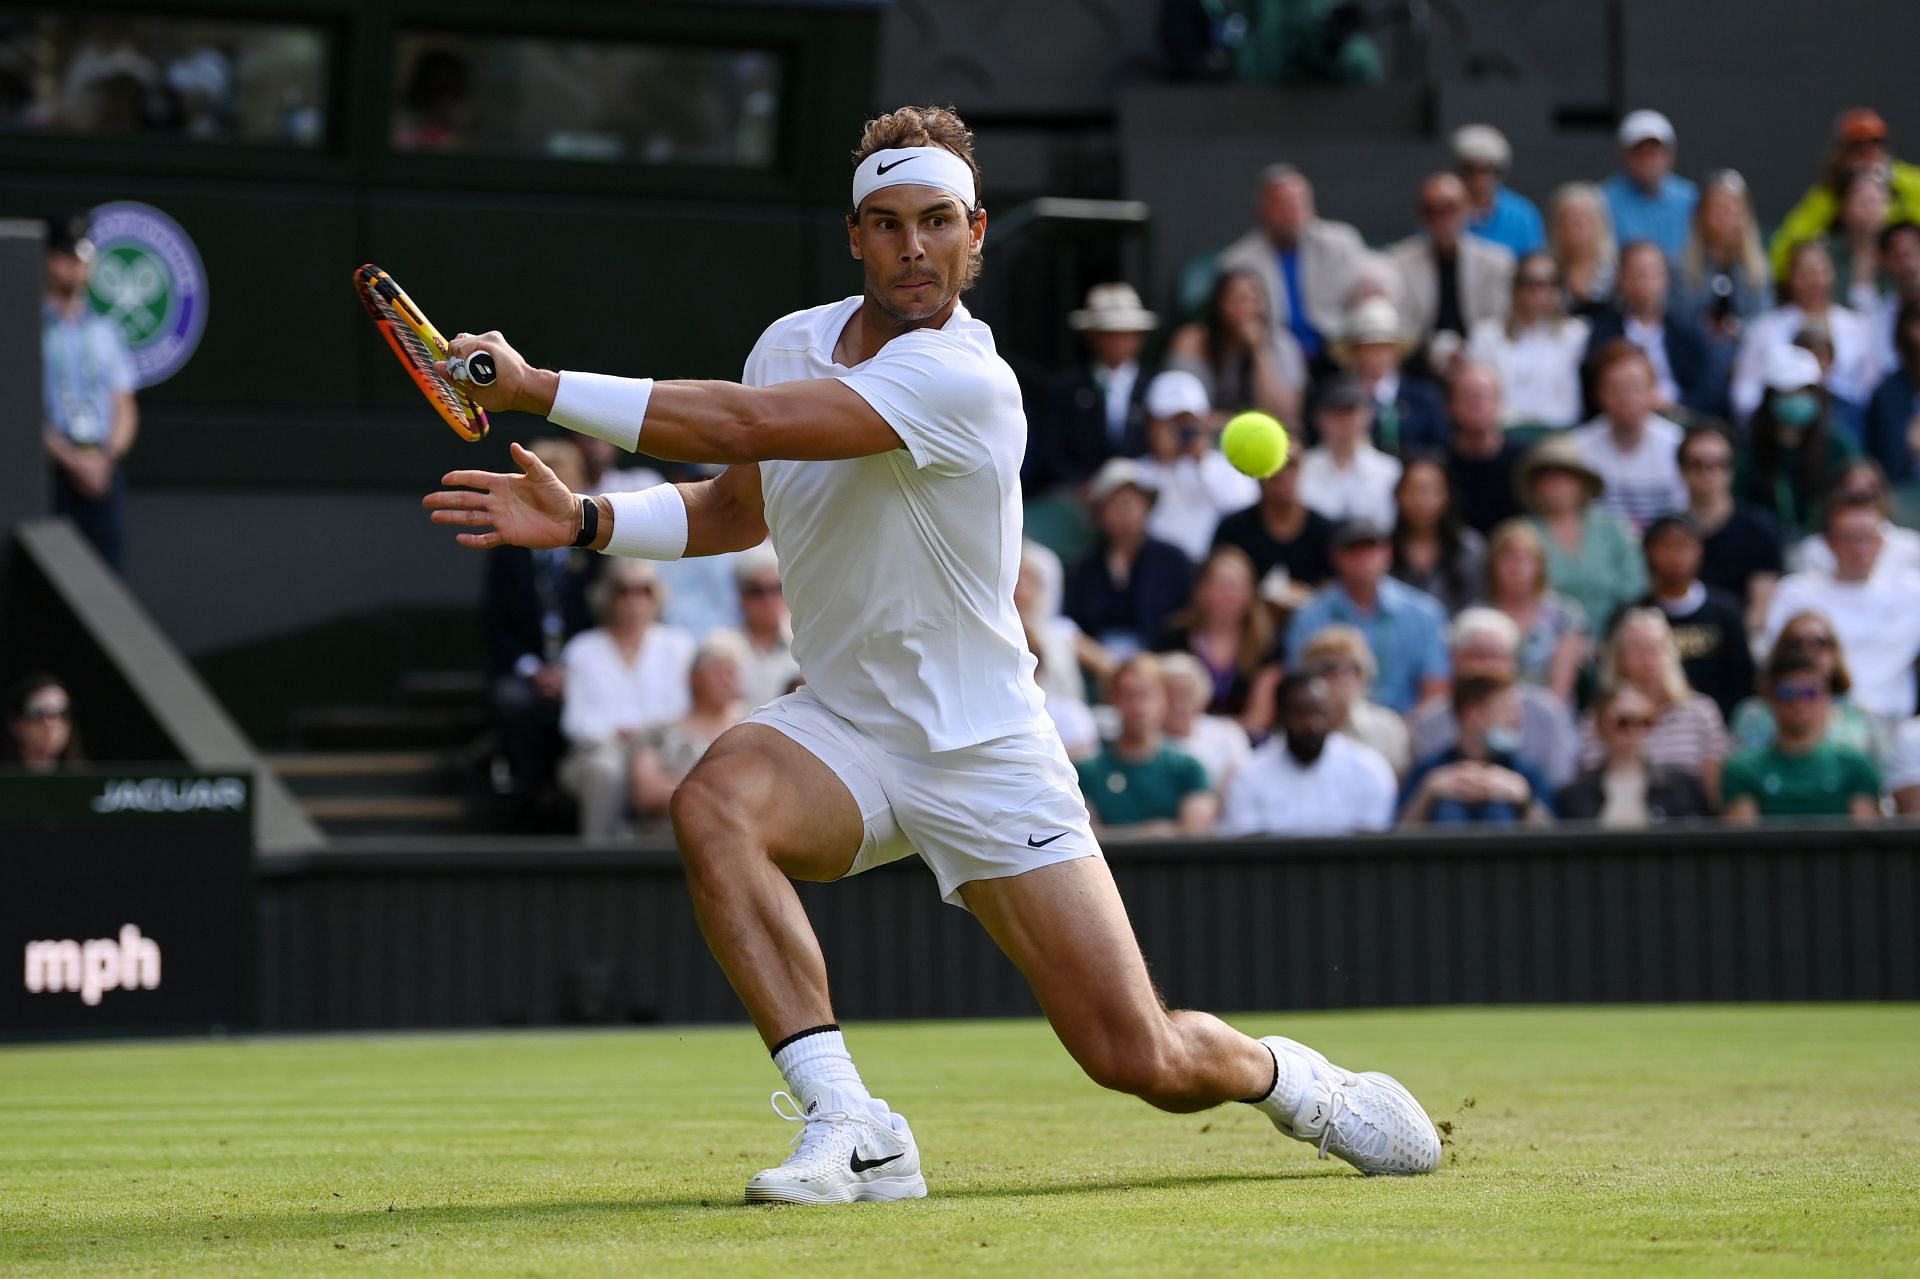 Wimbledon 2022 Rafael Nadal next match Opponent, venue, live streaming and schedule Round 3